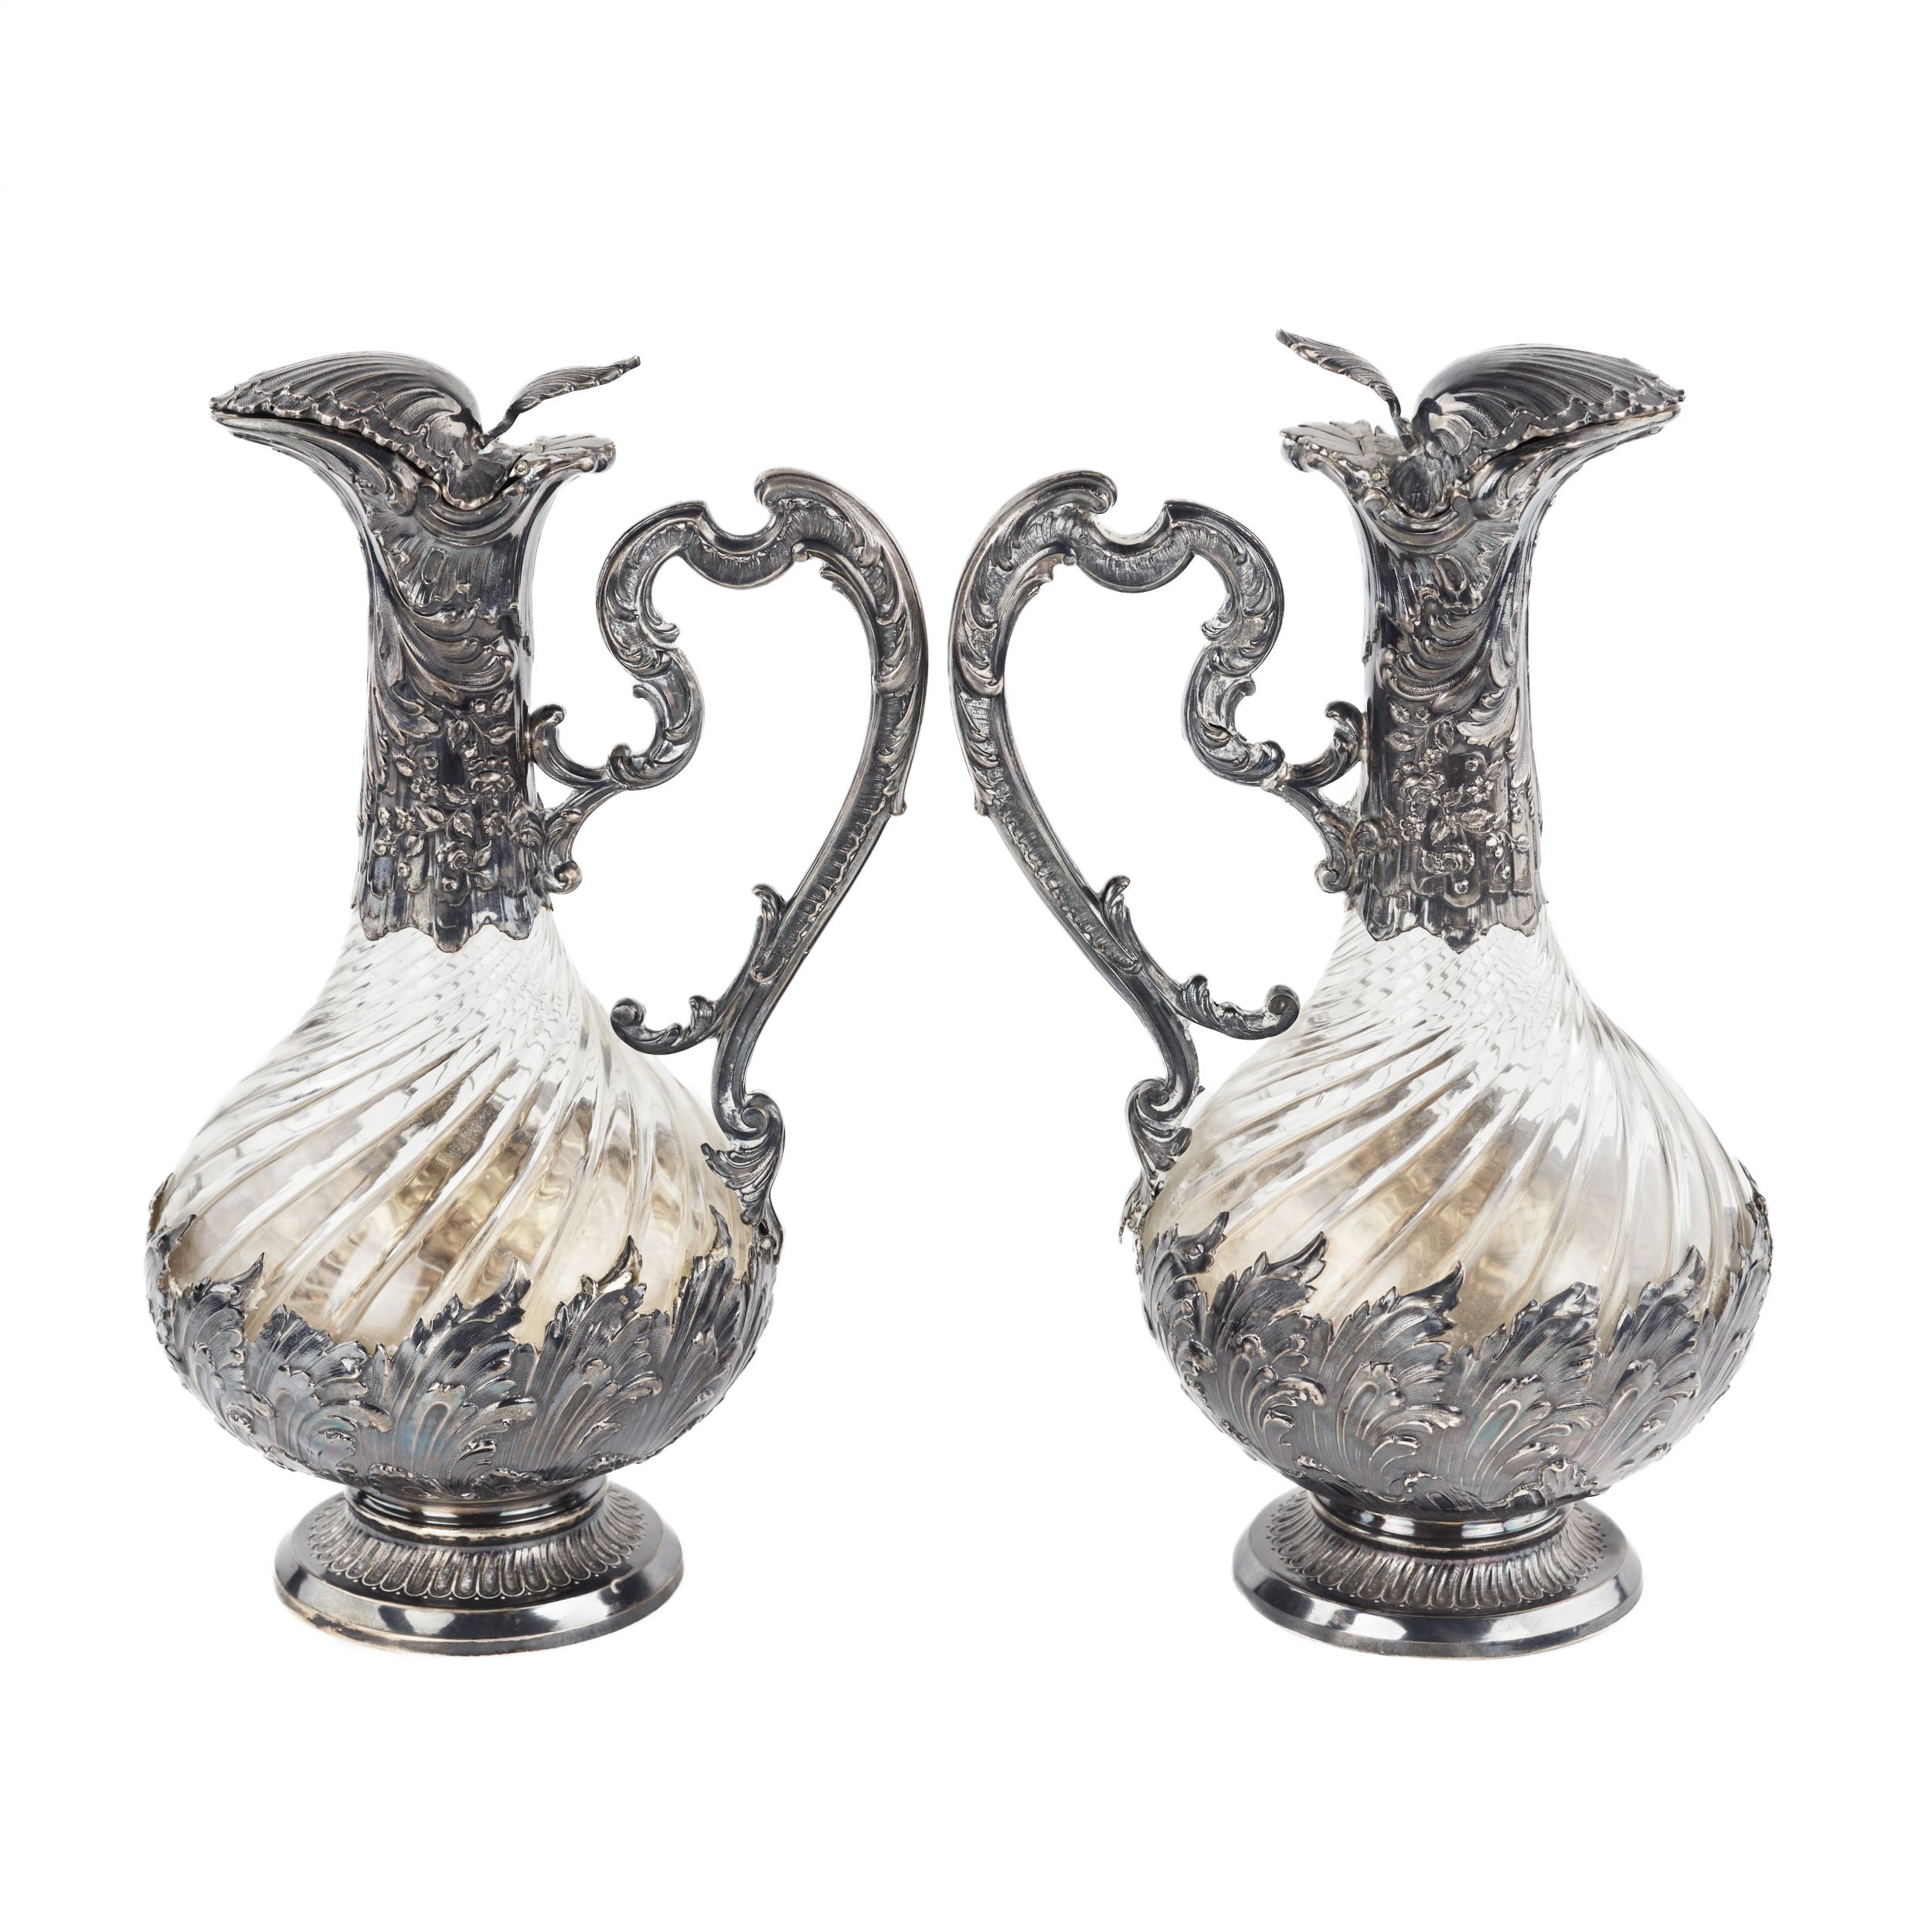 Frangiere & Laroche. Pair of French wine jugs. Glass in silver. 1880s. - Image 4 of 9